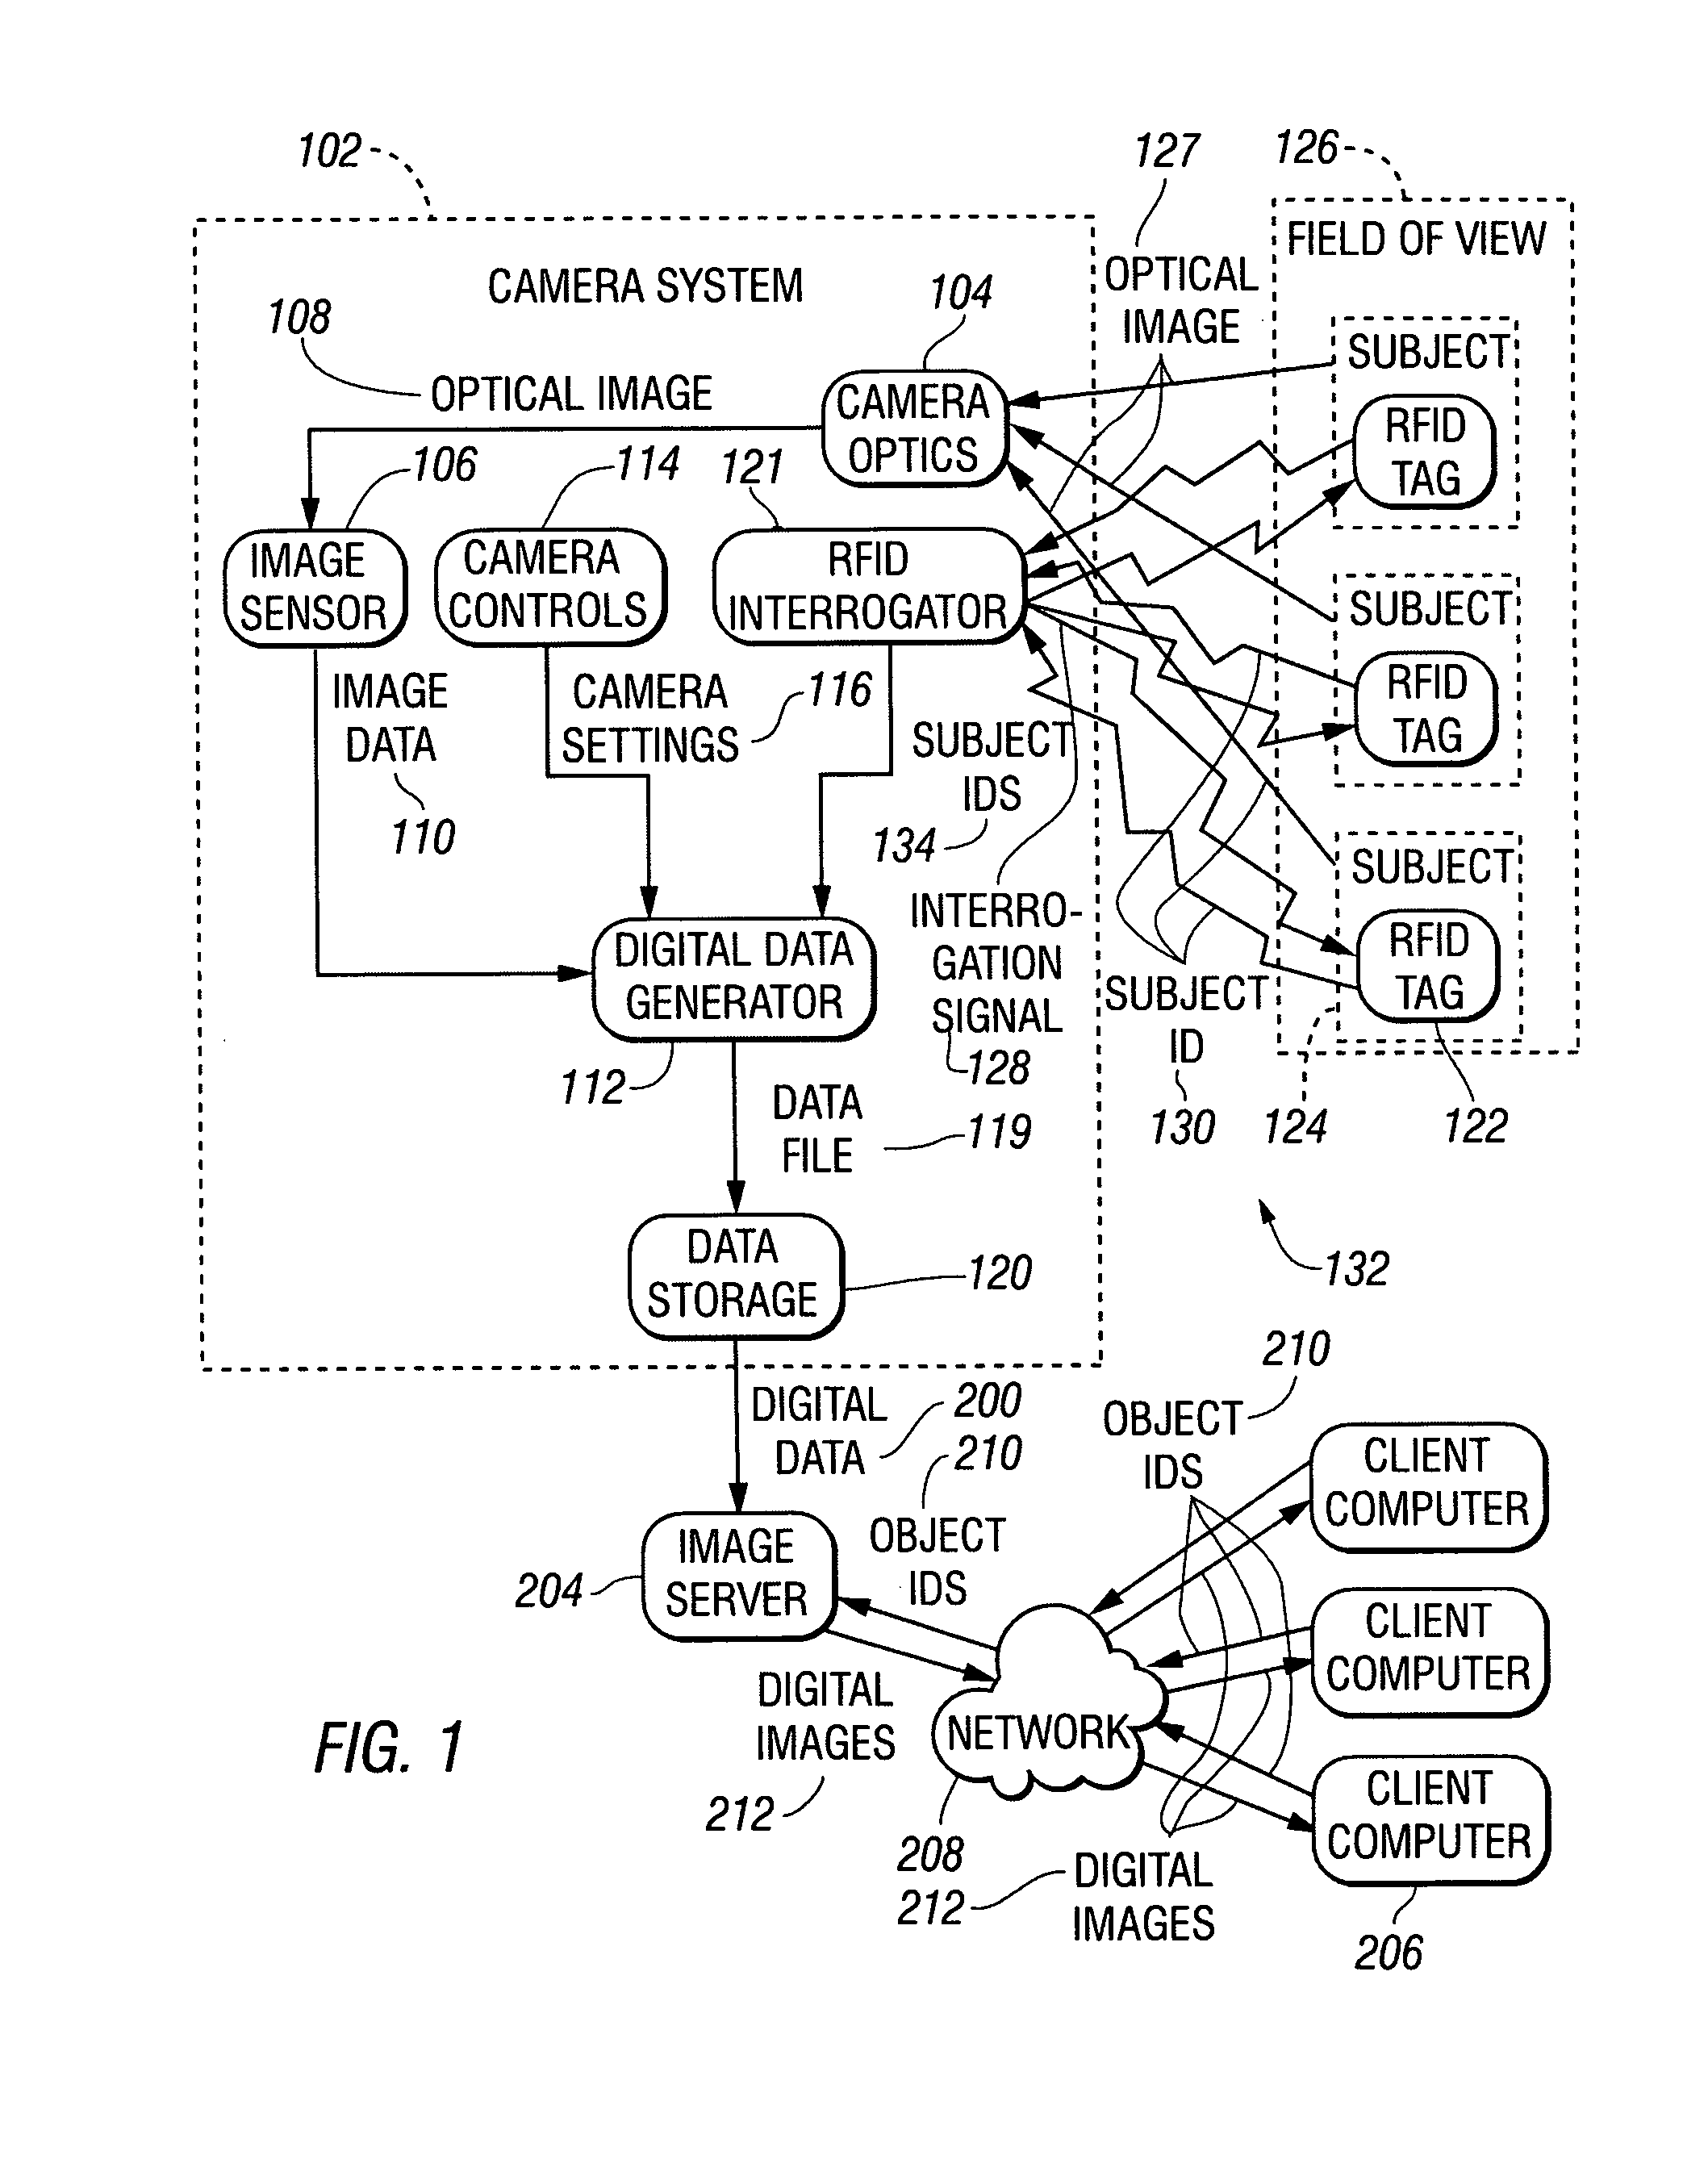 System and method for producing and distributing digital images including data identifying subjects being photographed